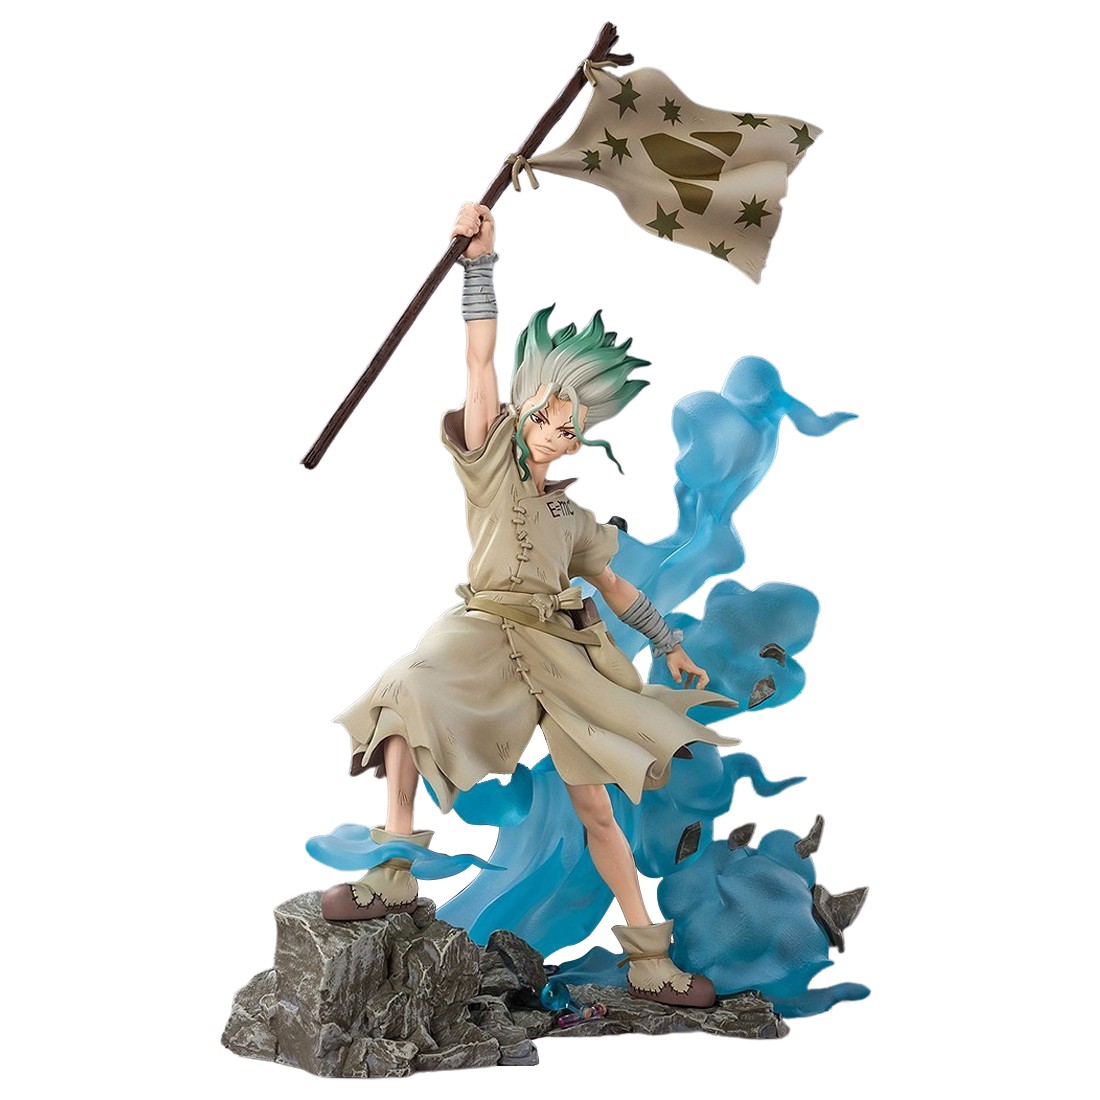 Ishigami Senku Air Cushion Dr. STONE limited to Taito Online Crane, Goods / Accessories